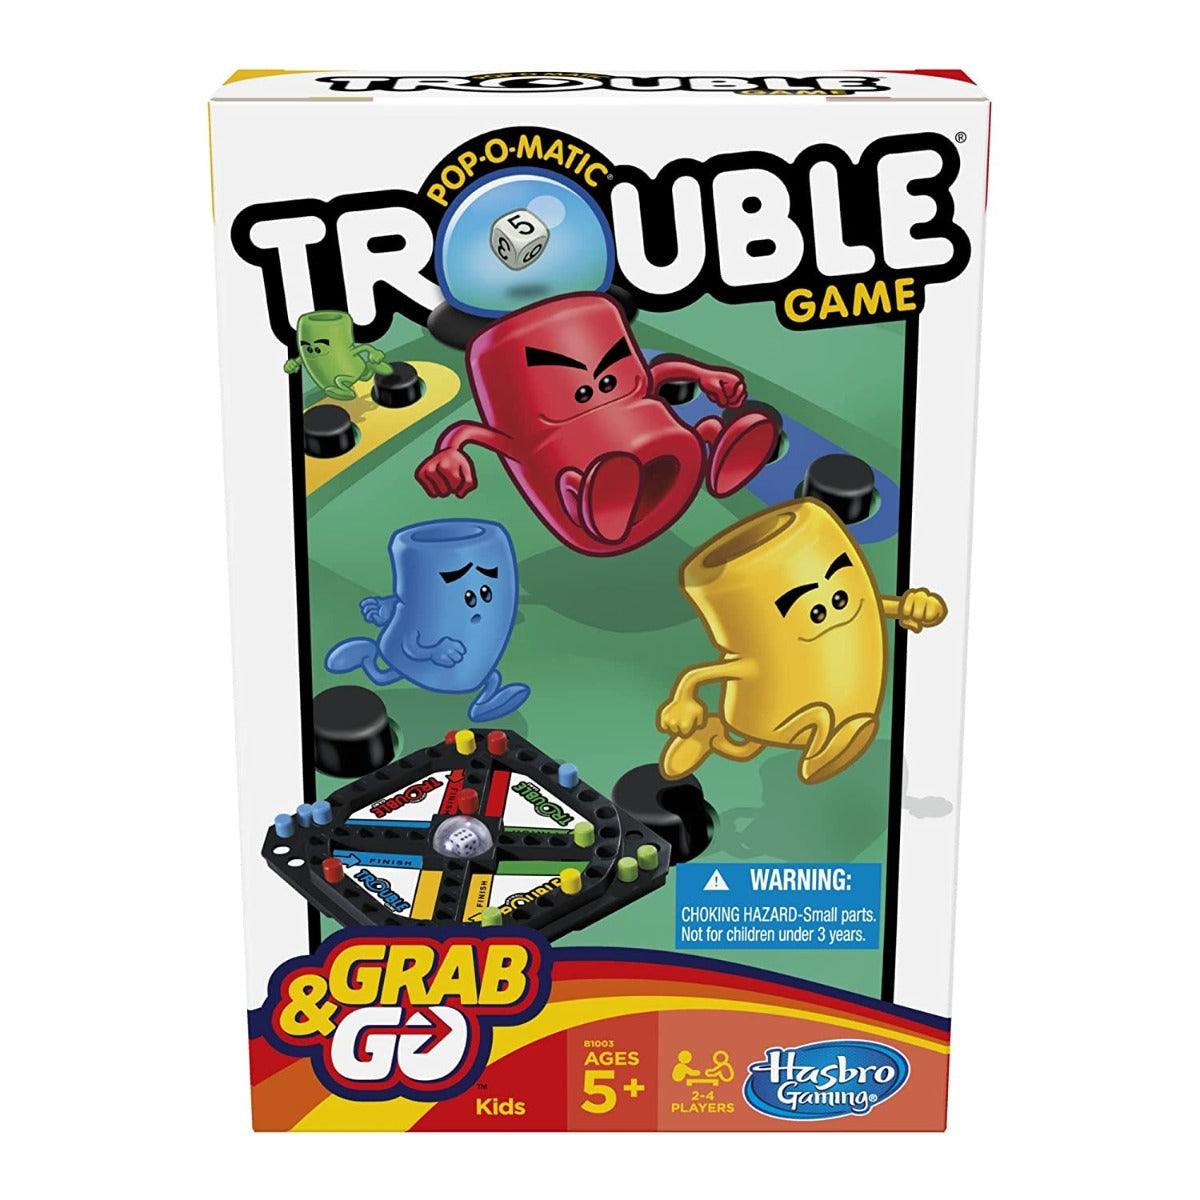 Hasbro Gaming Pop-O-Matic Trouble Grab & Go Game for Kids Ages 5 and Up